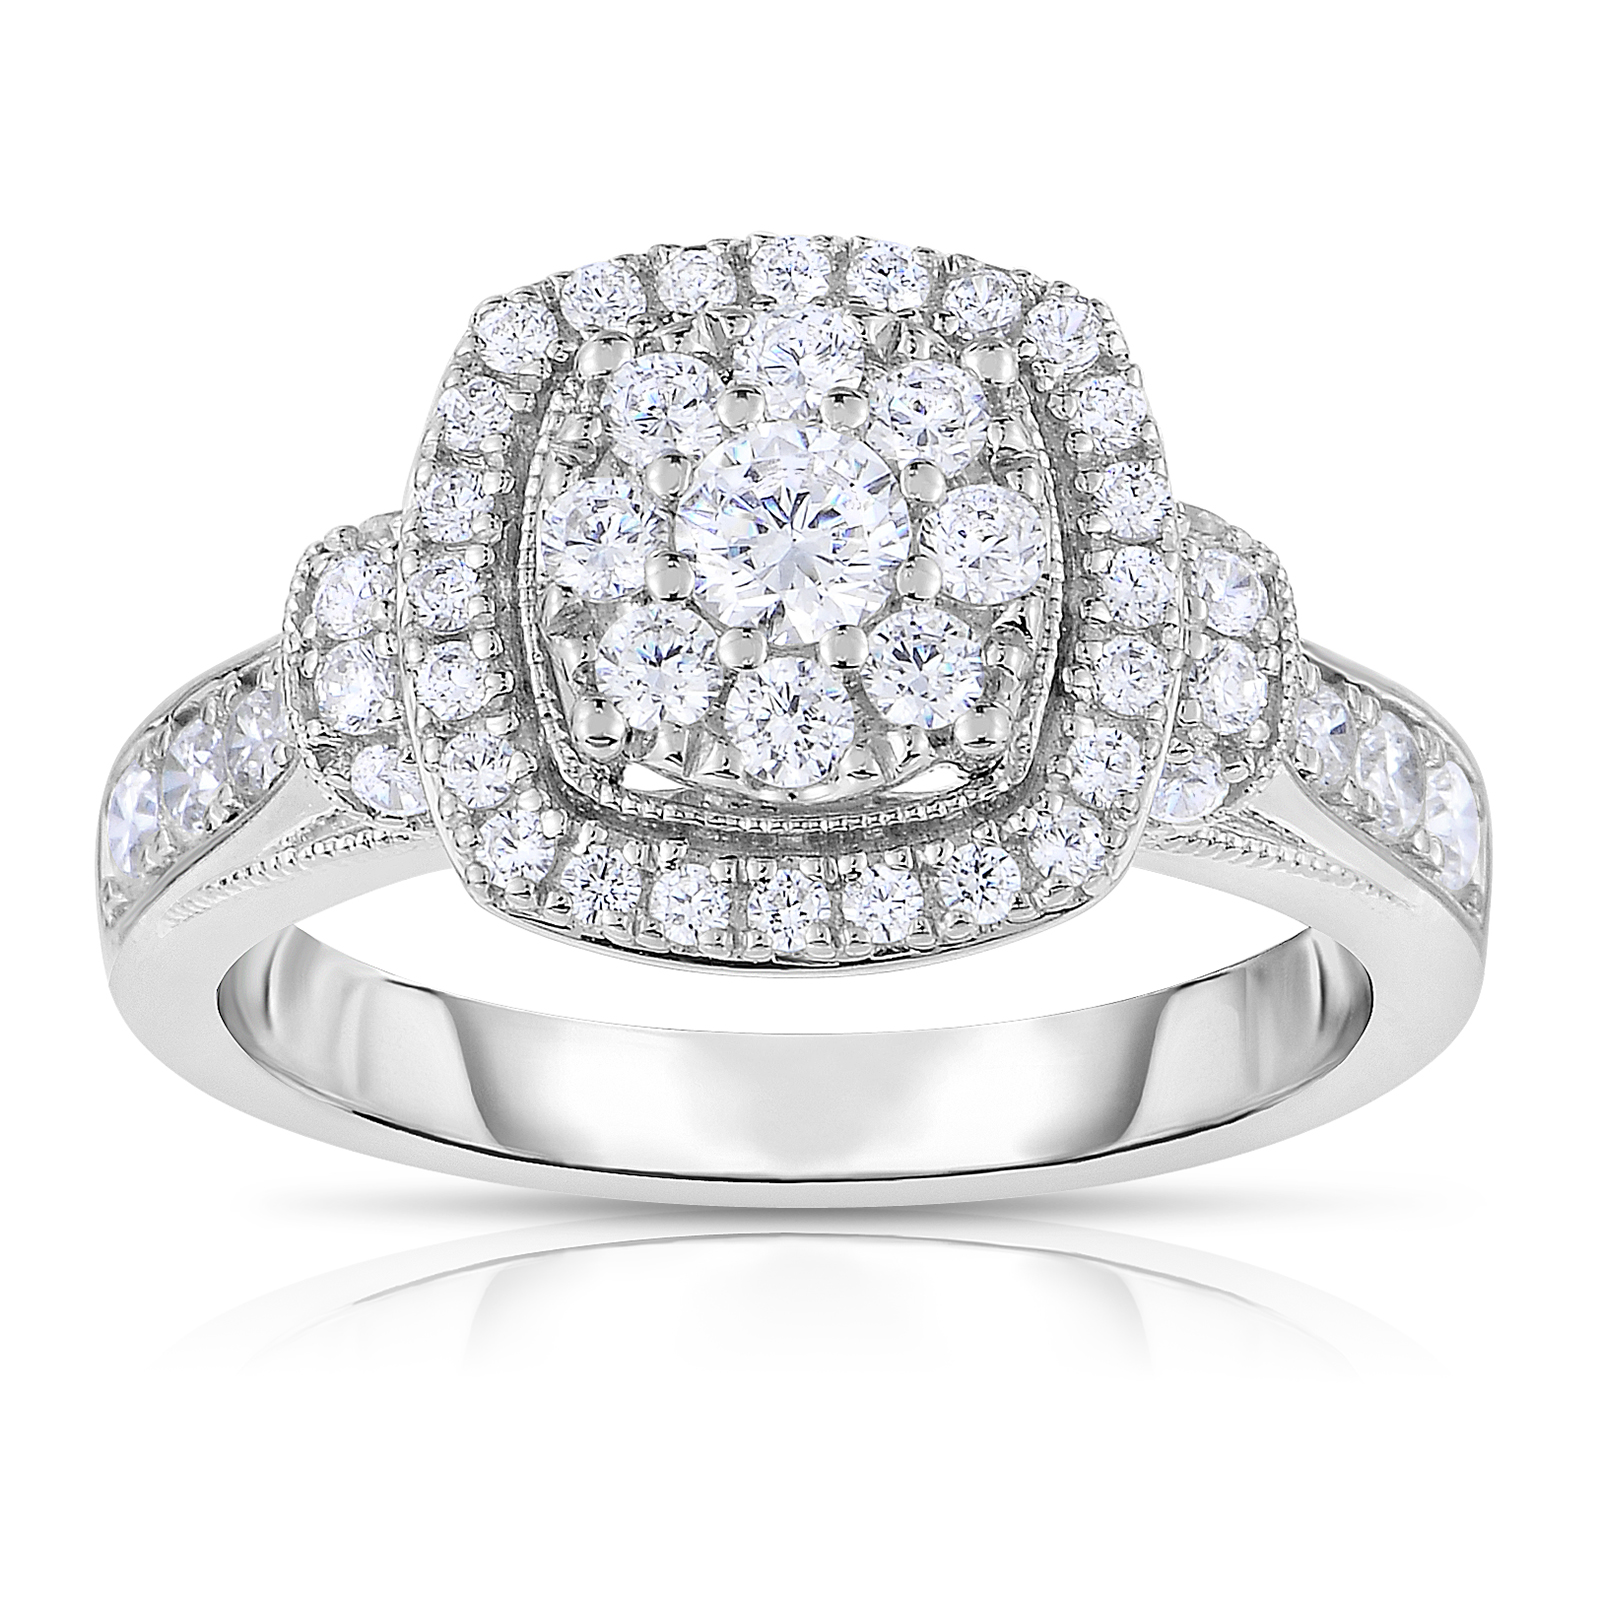 Wrapped In Radiance 10KW 1 CTTW Certified Diamond Round Ring